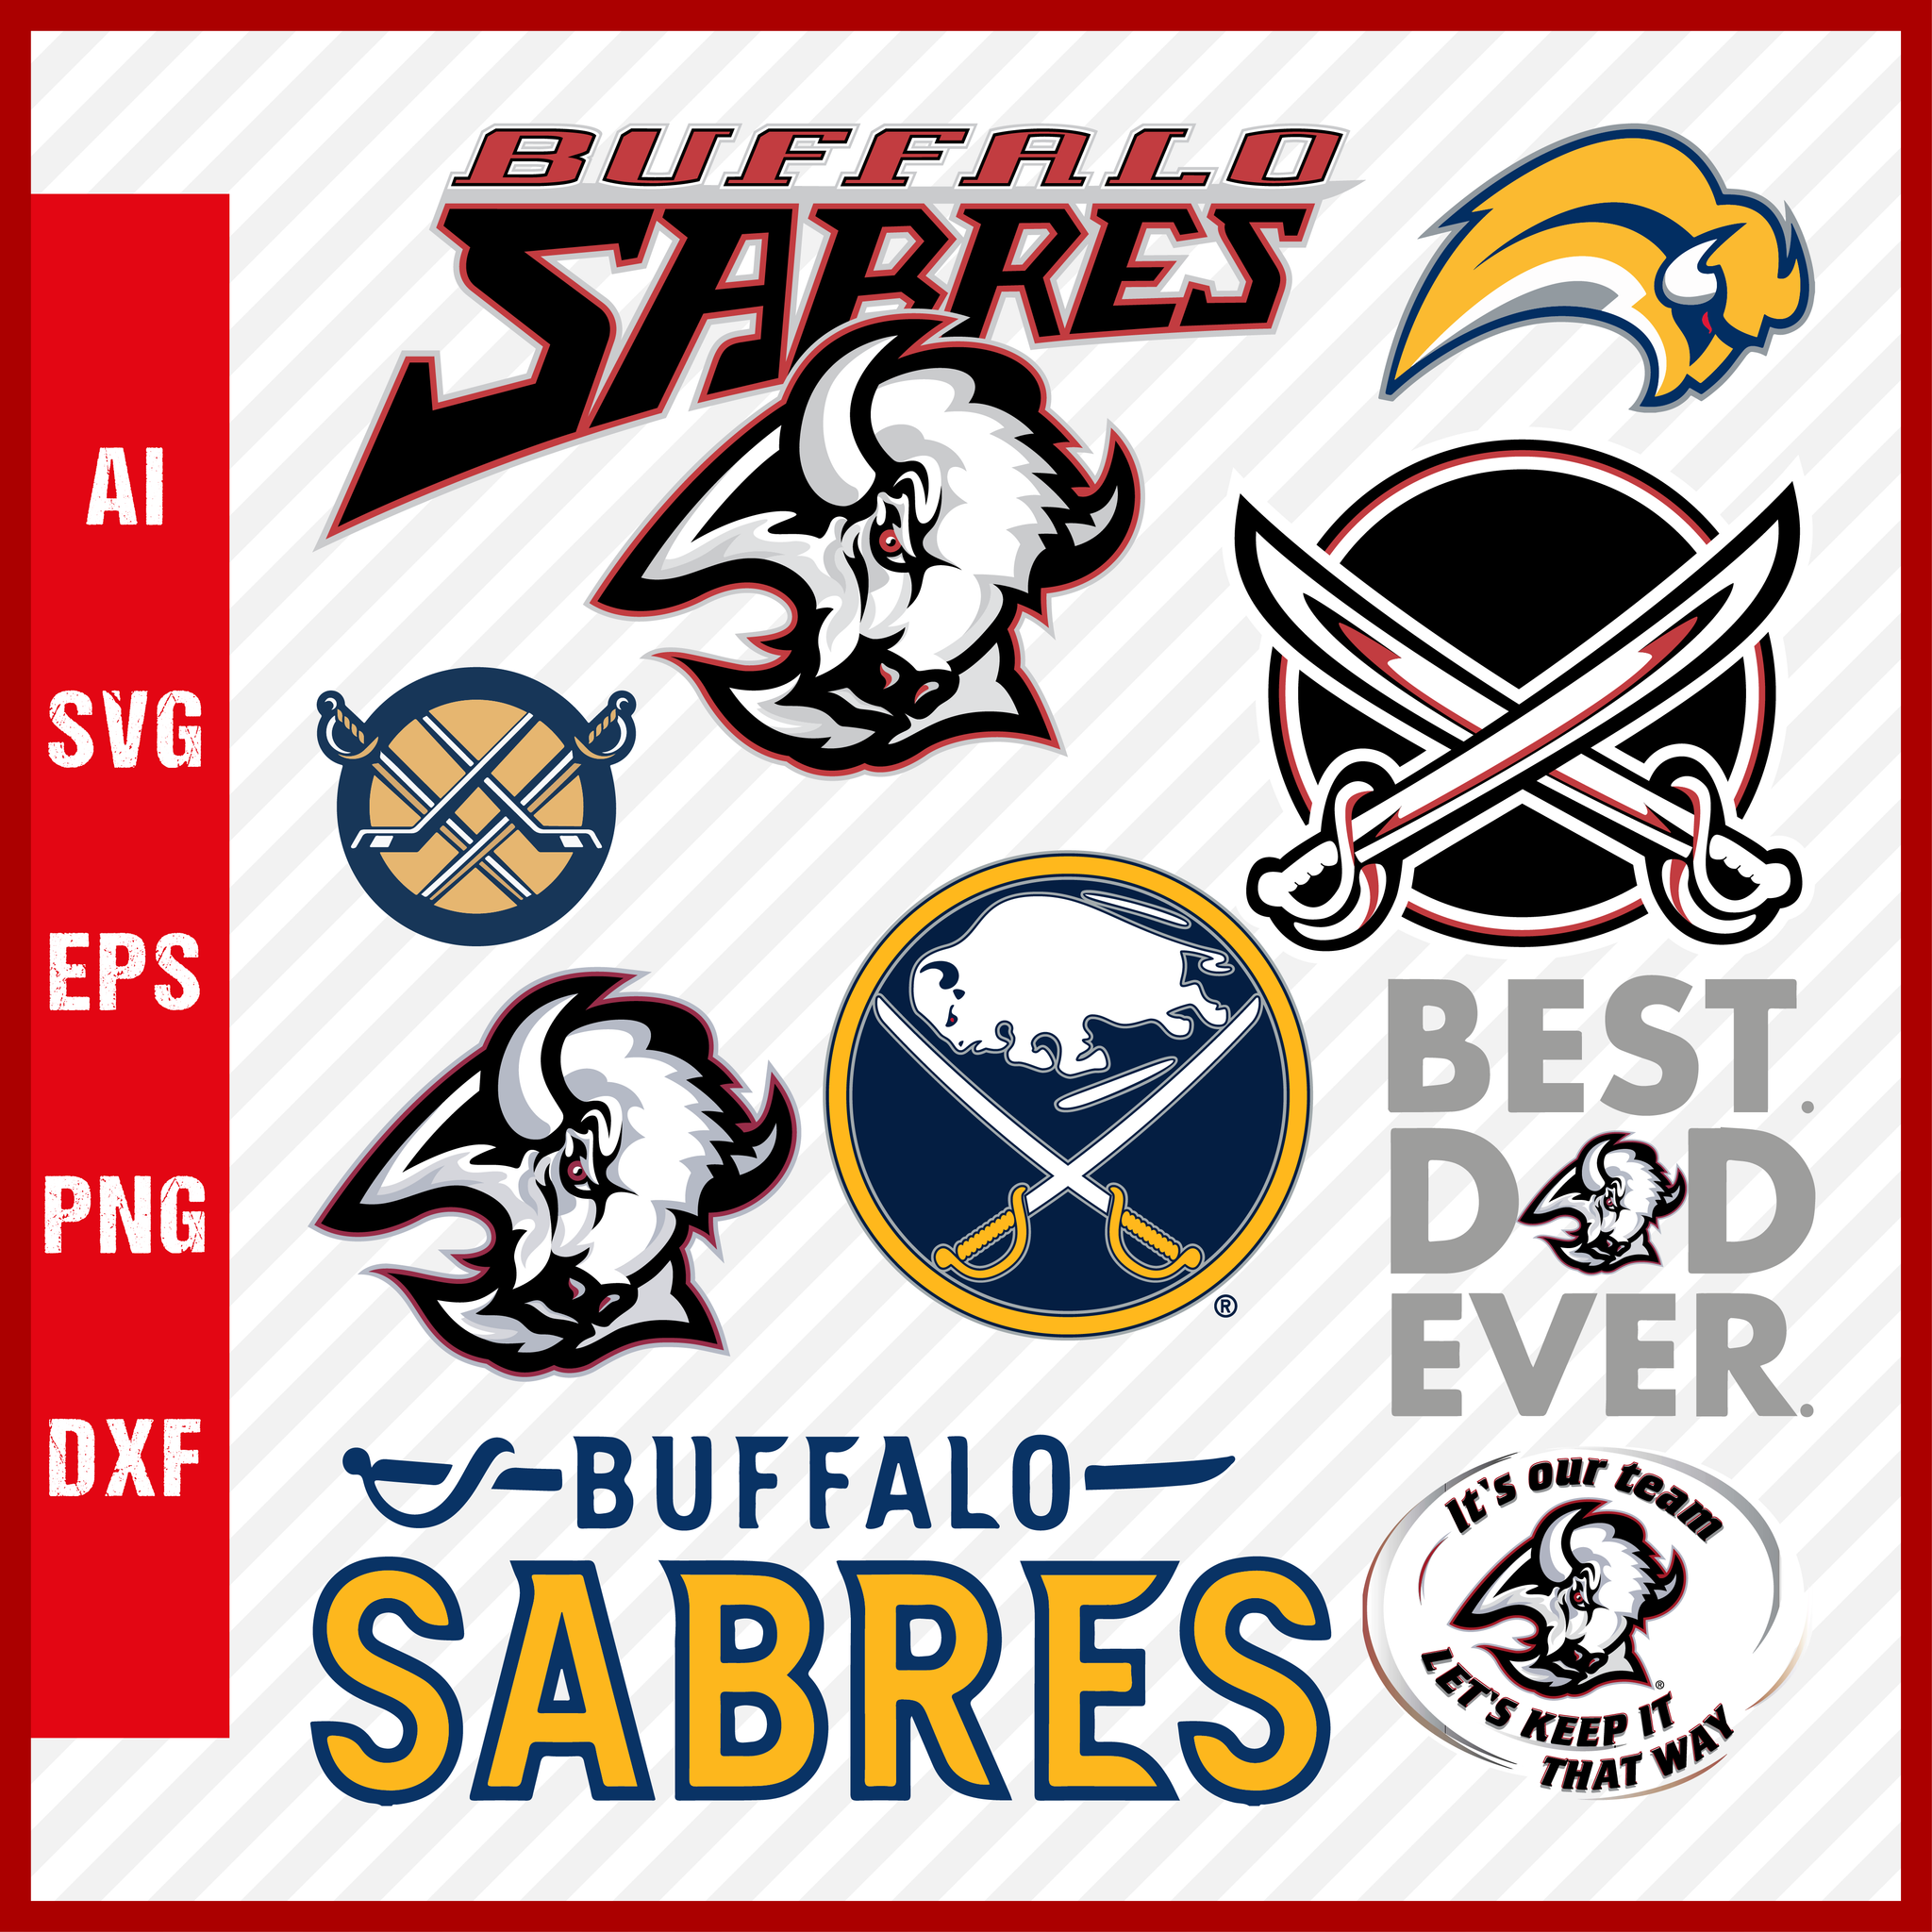 Buffalo Sabres Gifts & Merchandise for Sale